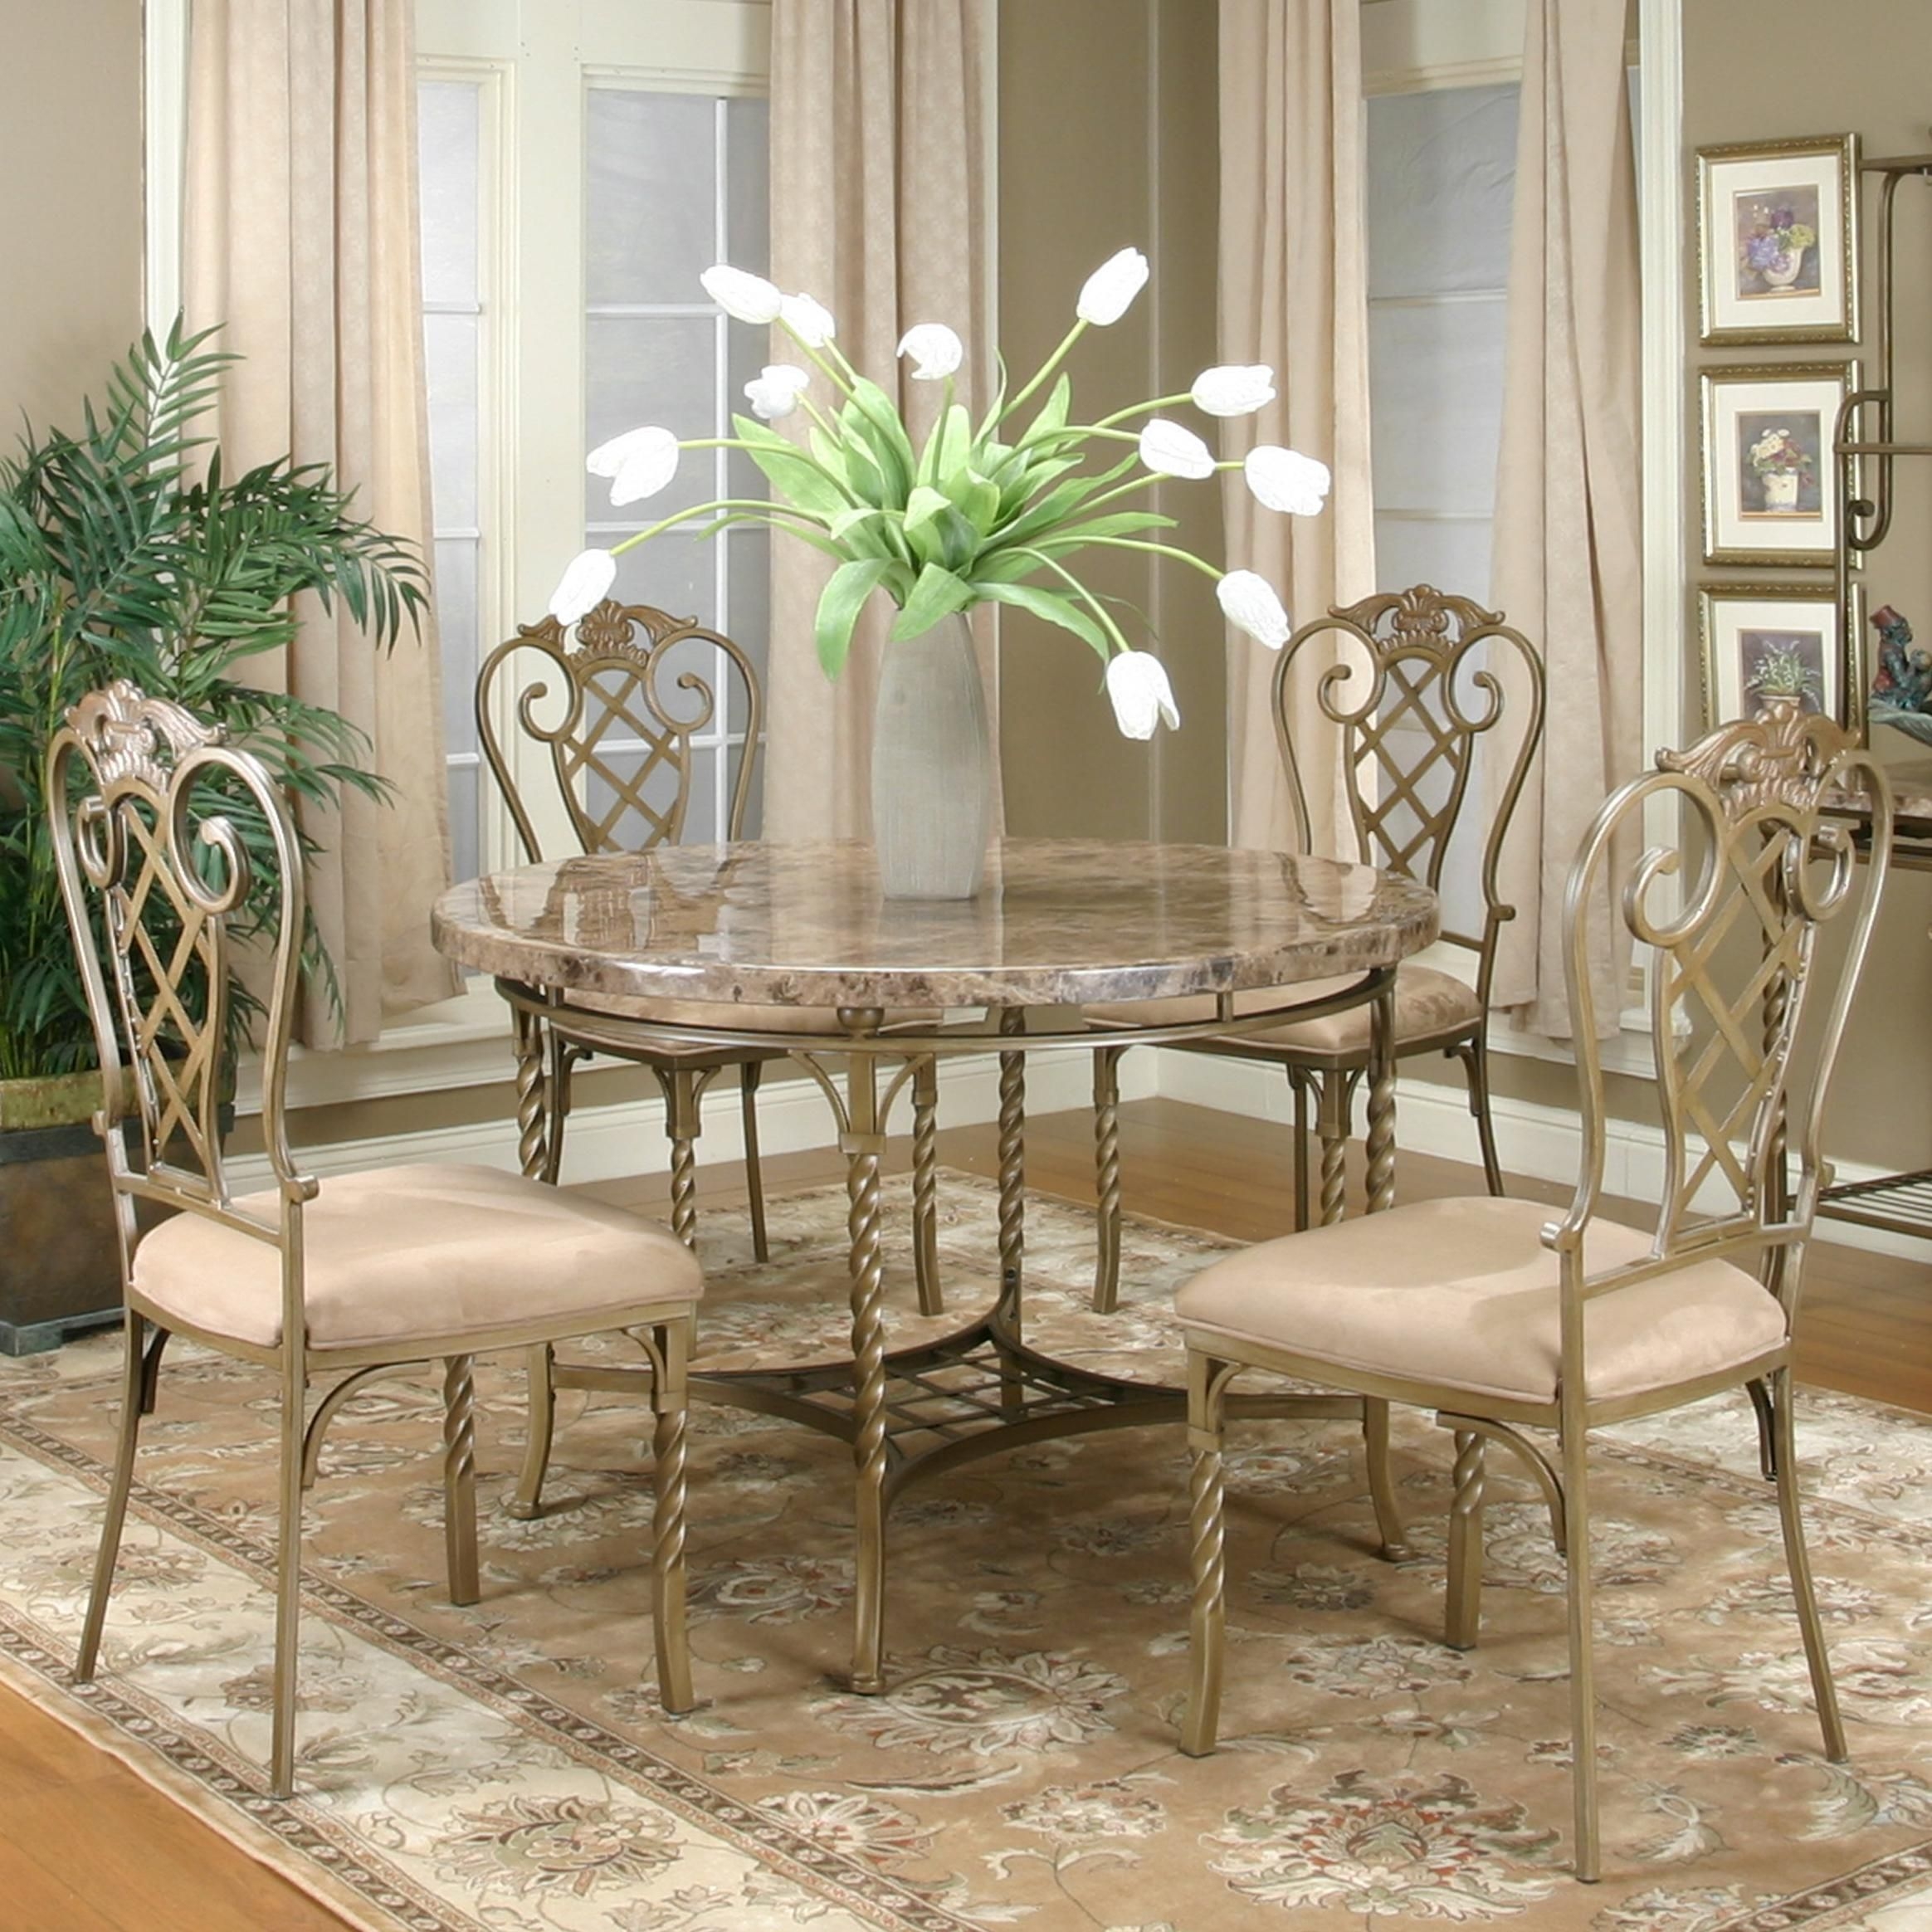 Marble top dining table set 5